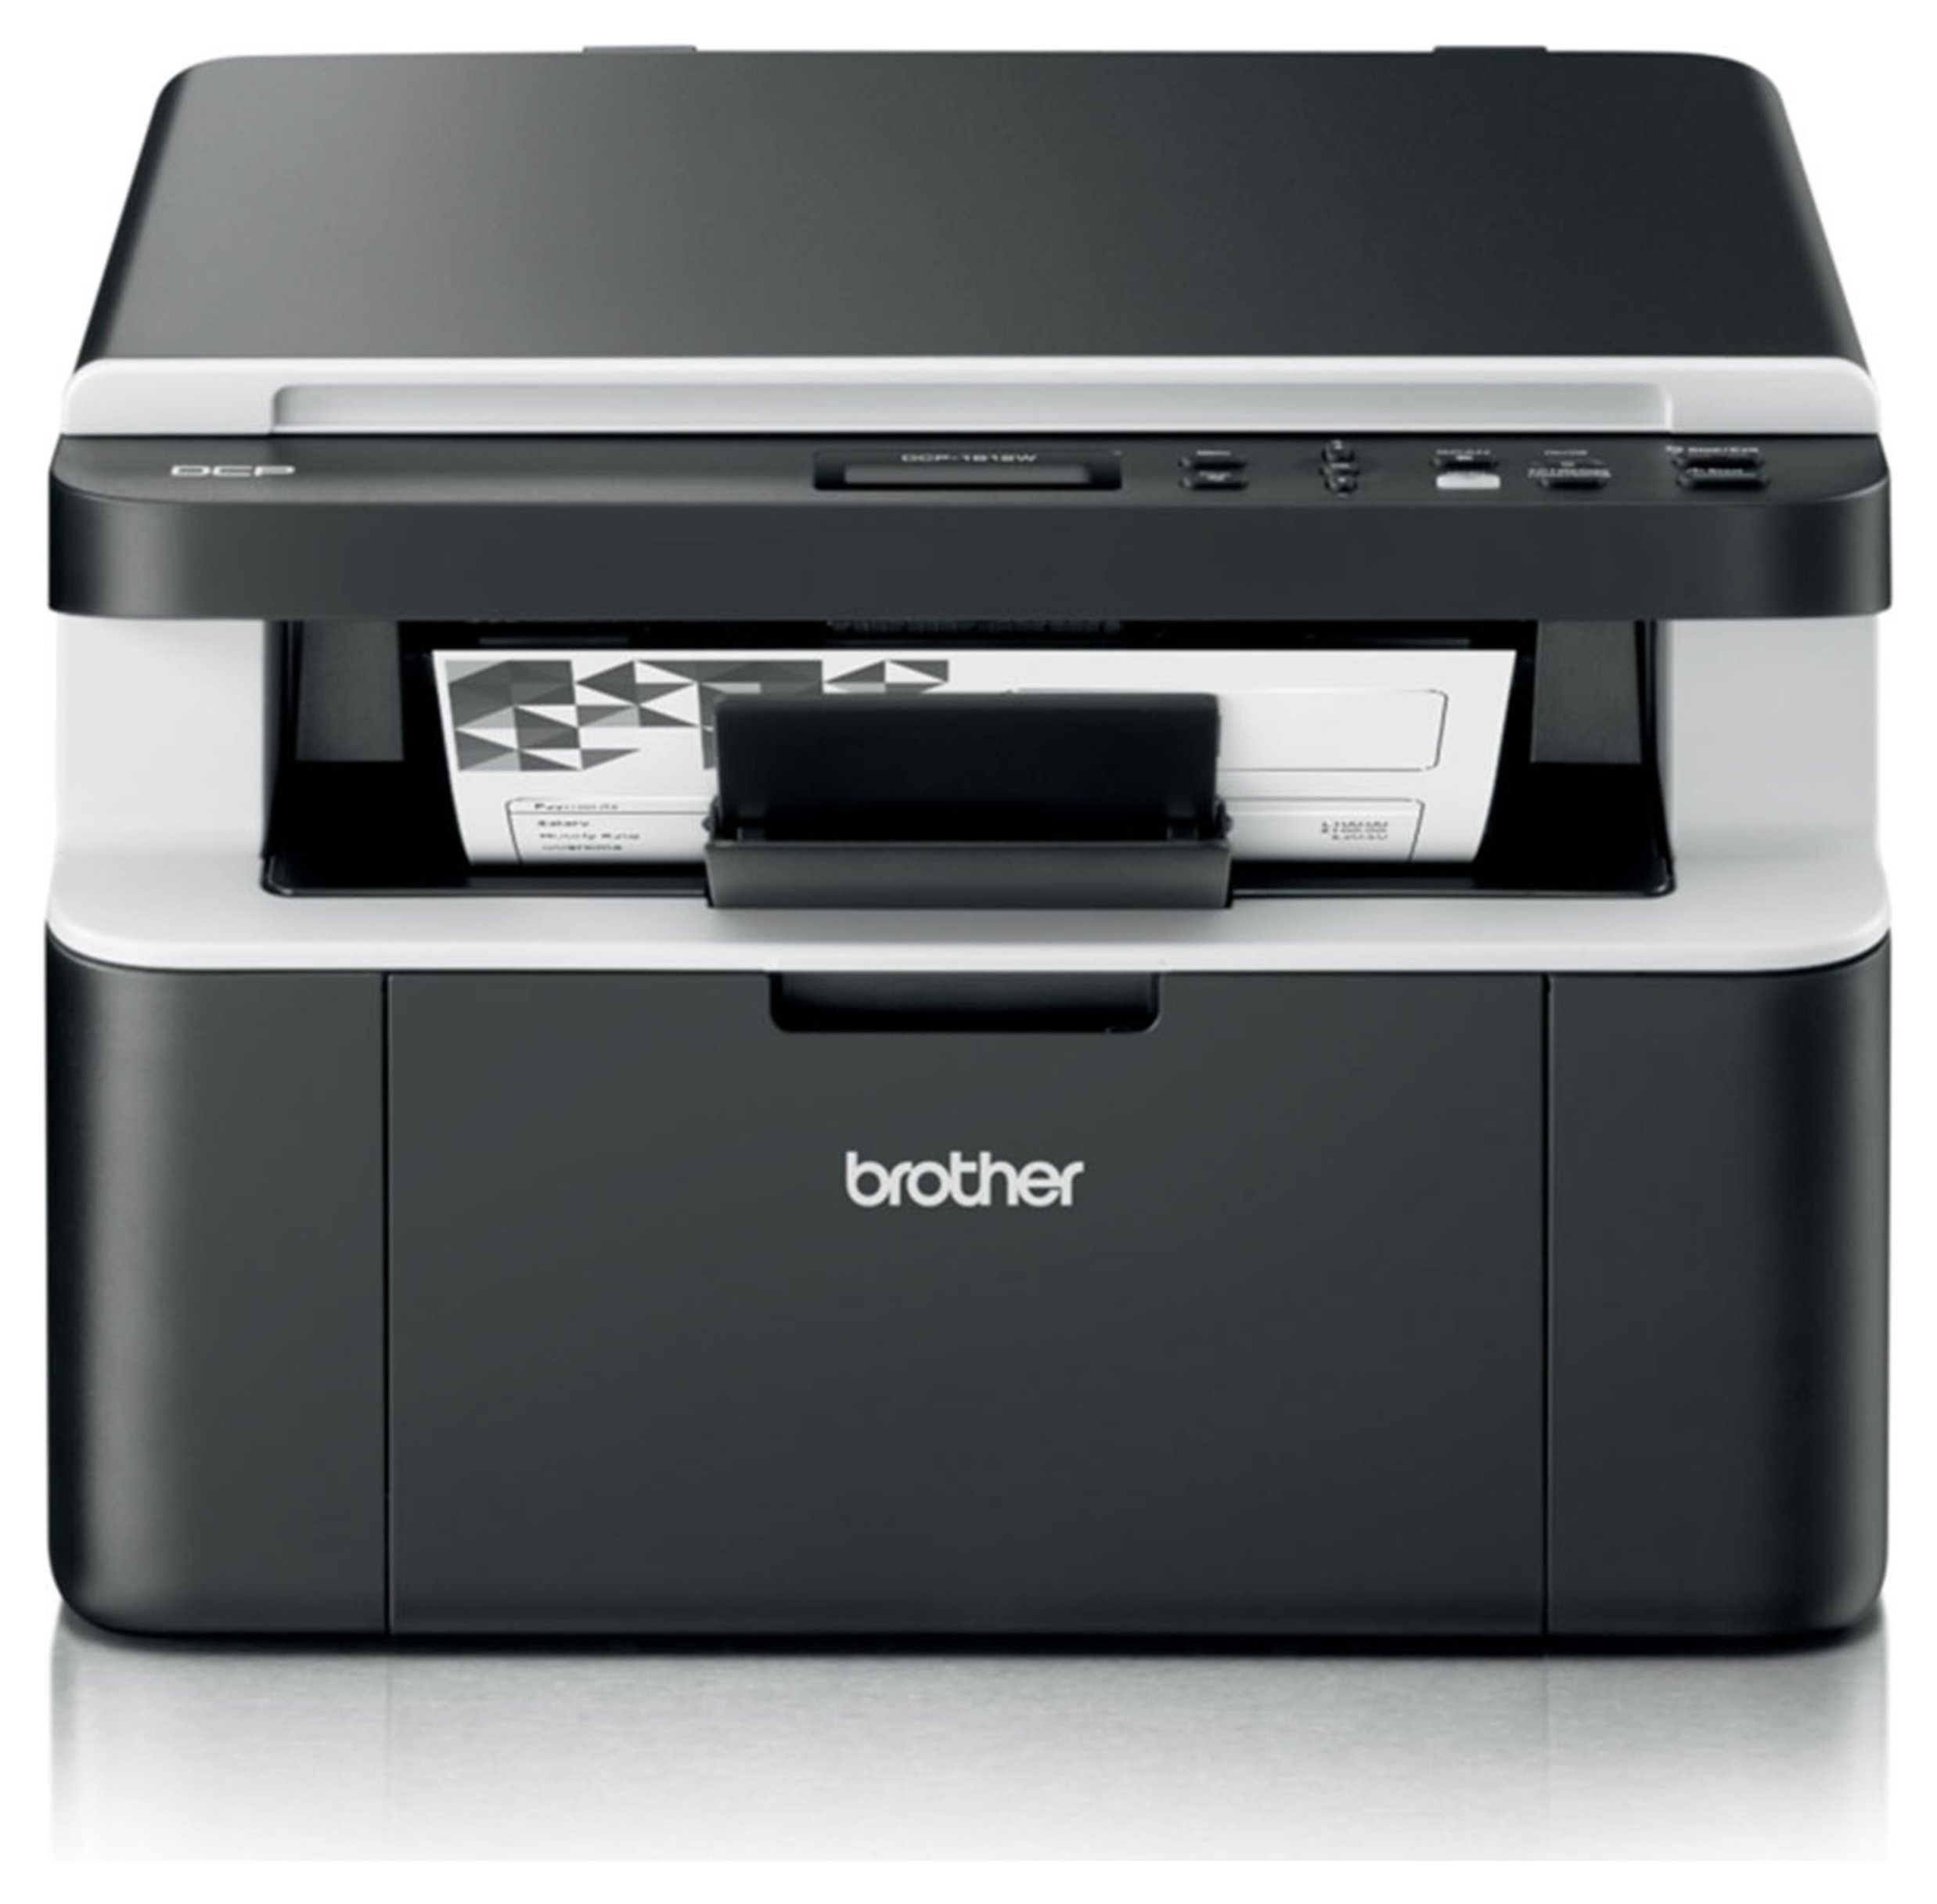 Brother dcp 1612w software mac free